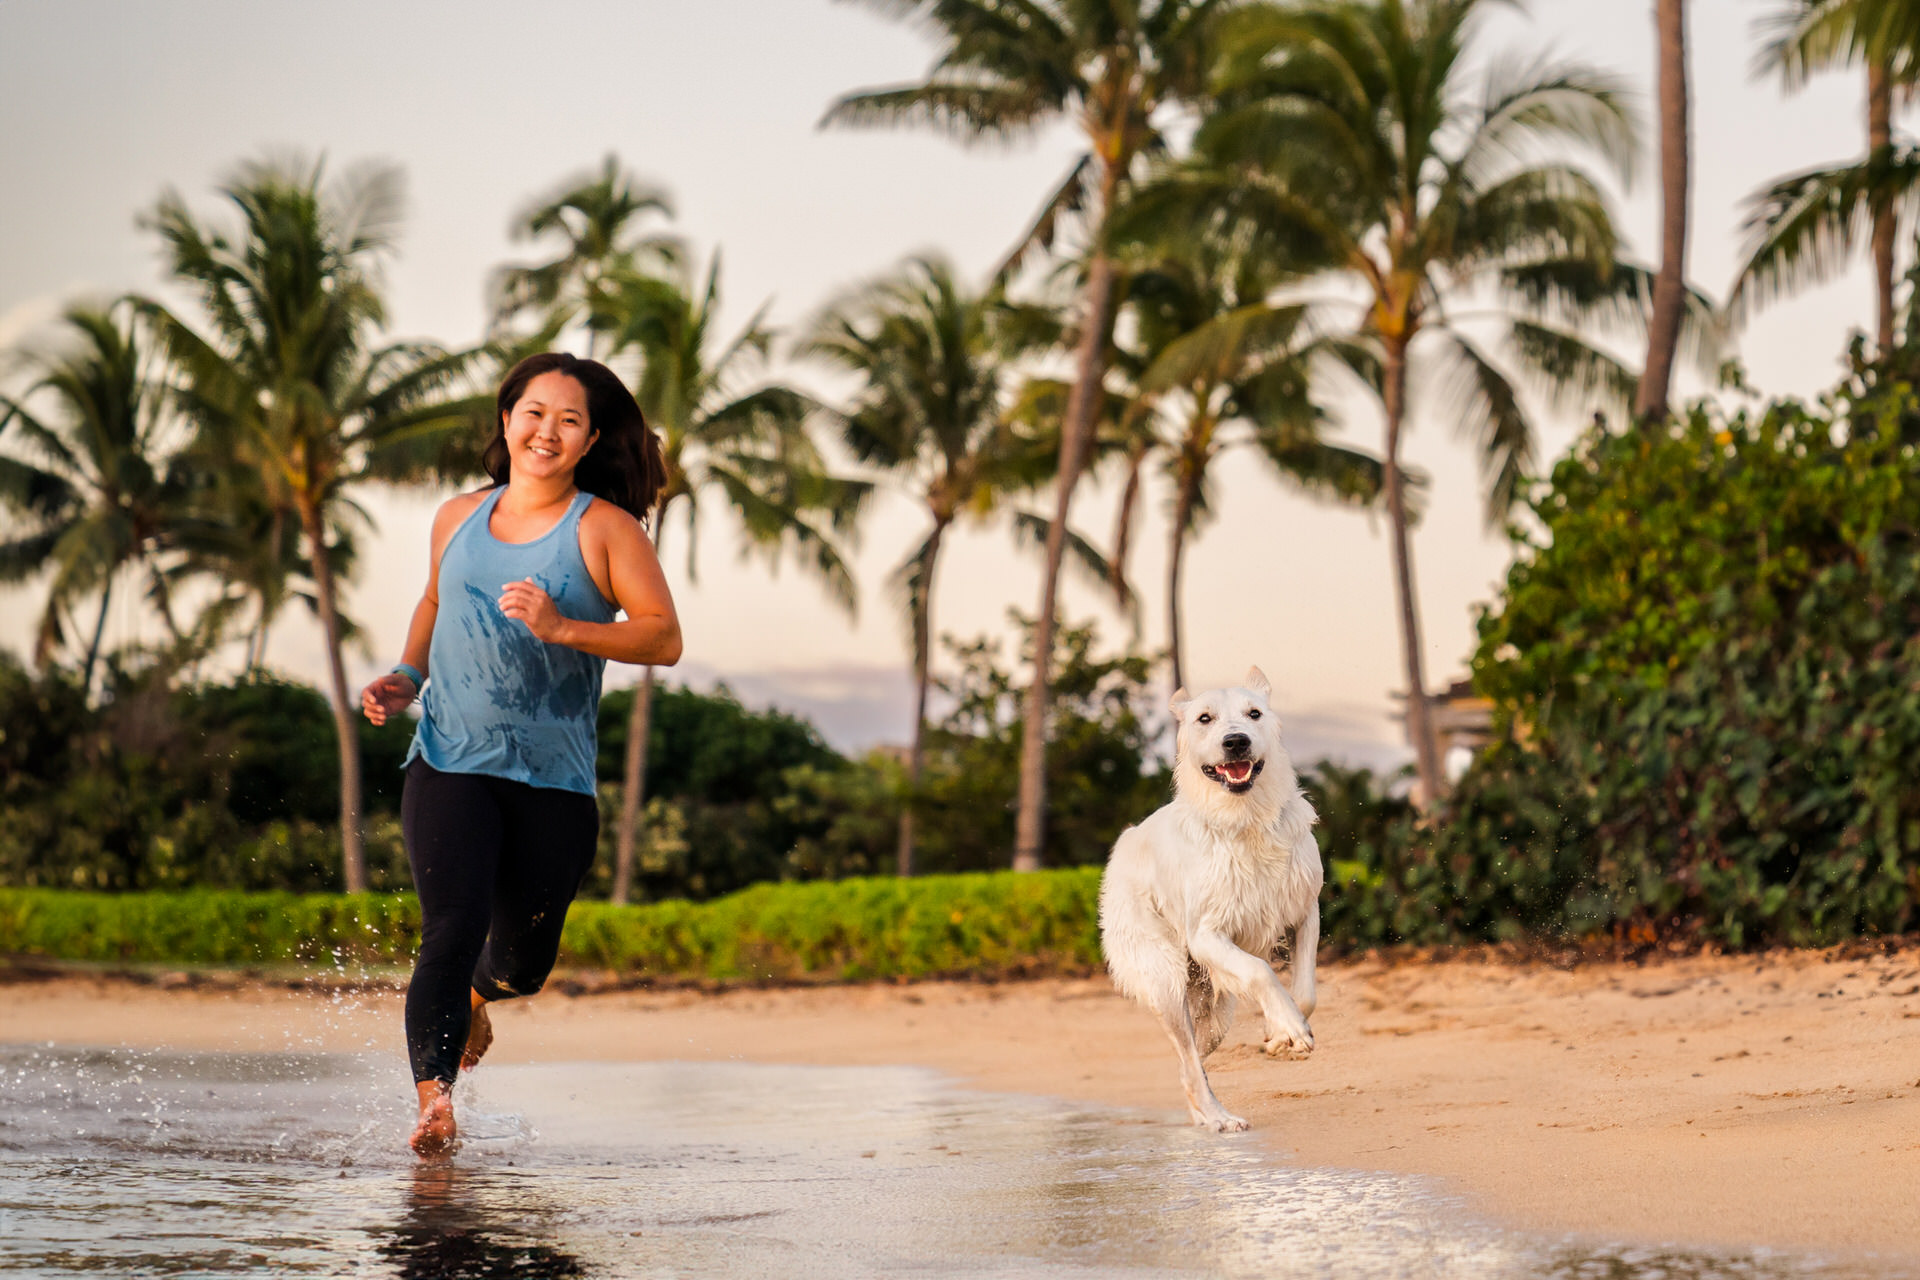 Woman and dog running on beach at sunset.